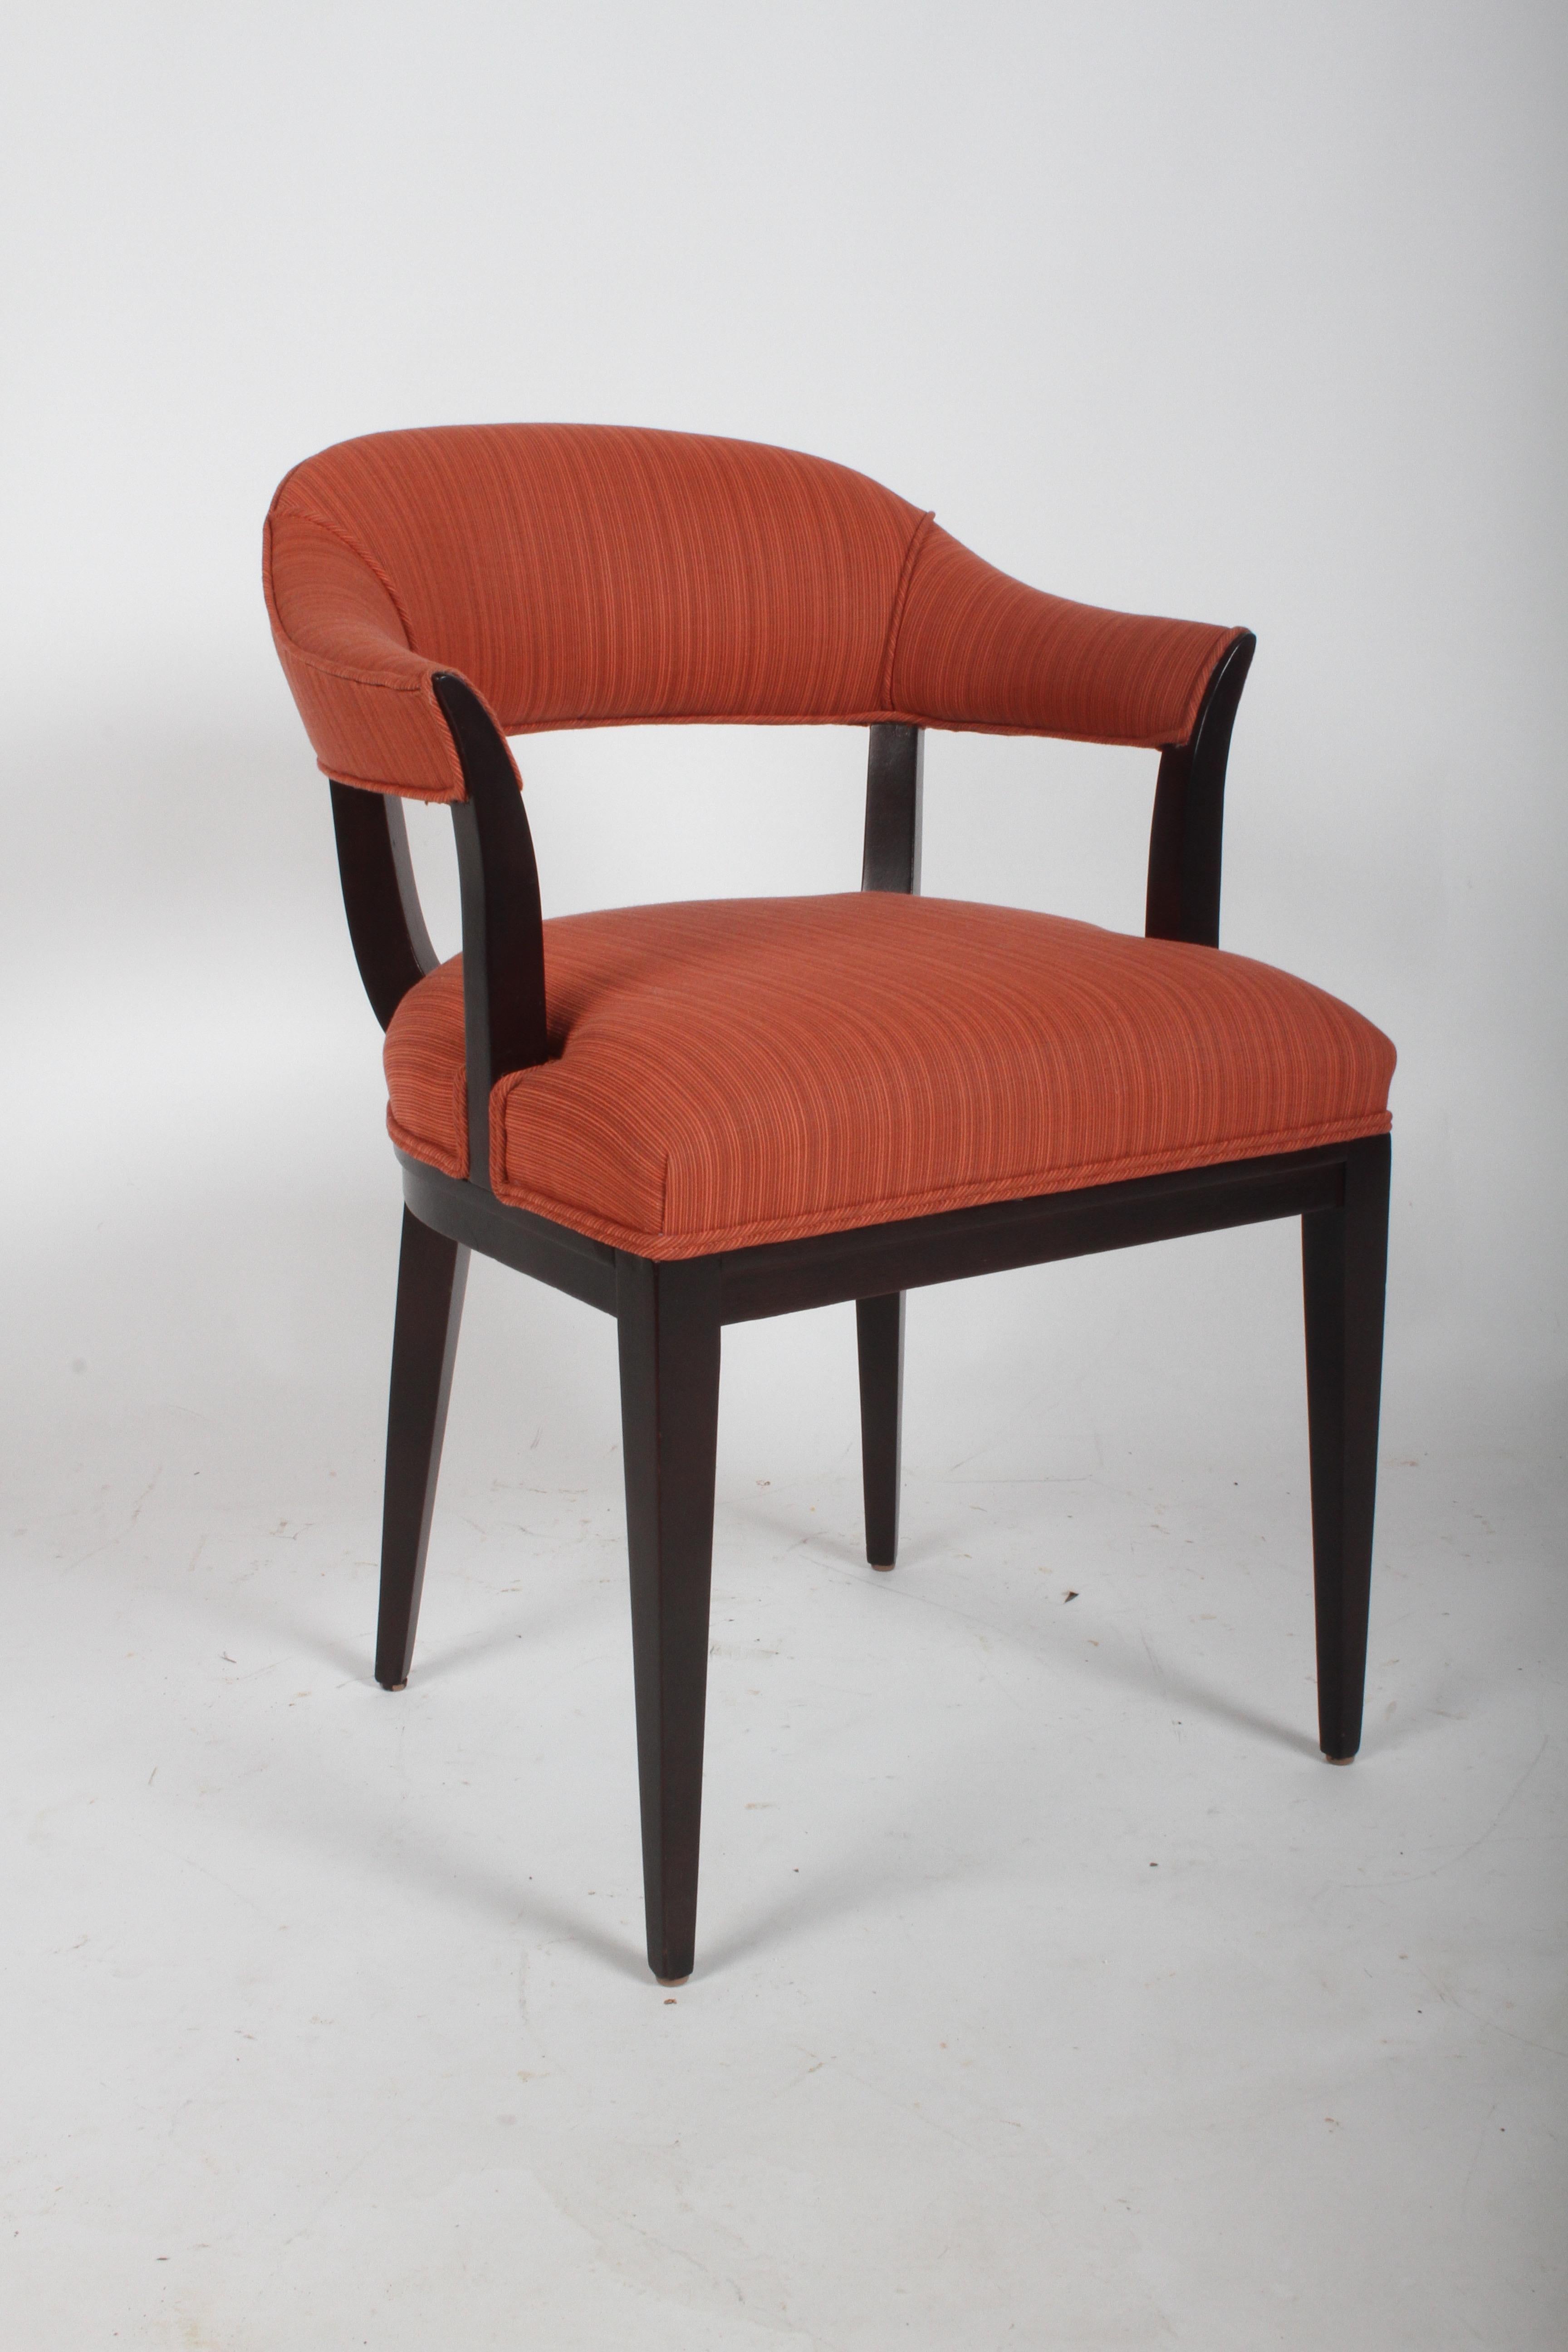 Pair of early 1940s Edward J. Wormley Elegant neoclassical style occasional arm chairs for Dunbar model No. 116B. As shown in The Other Face of Modernism book on Wormley an in the 1940s catalog. Refinished mahogany frames in dark espresso,